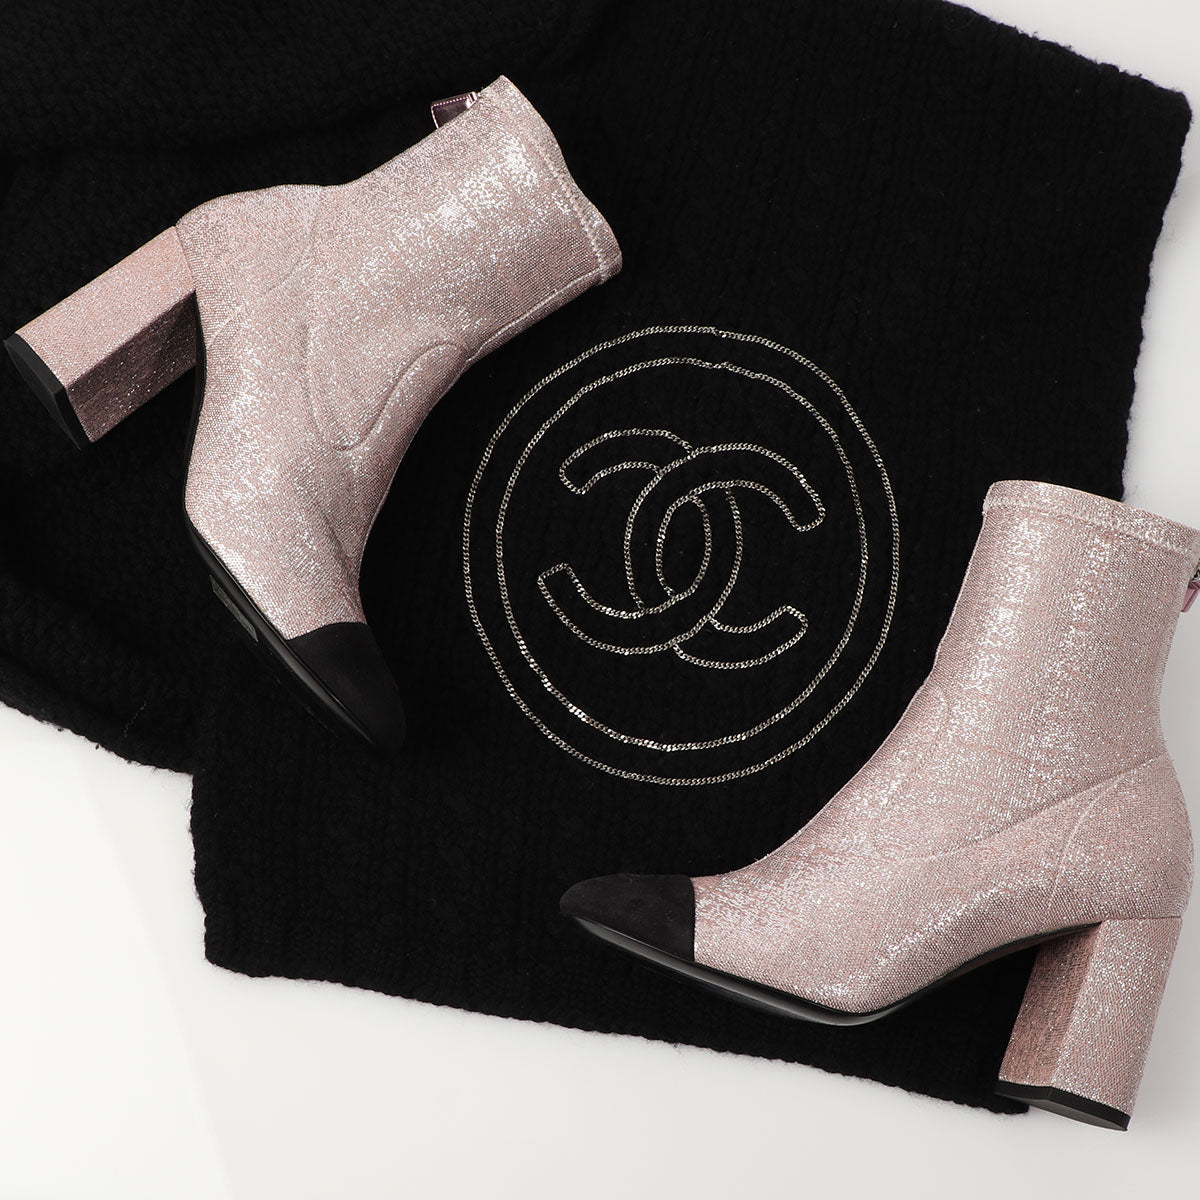 elektropositive mager væbner Chanel Pink and Black Sparkle Ankle Boots - Ann's Fabulous Closeouts